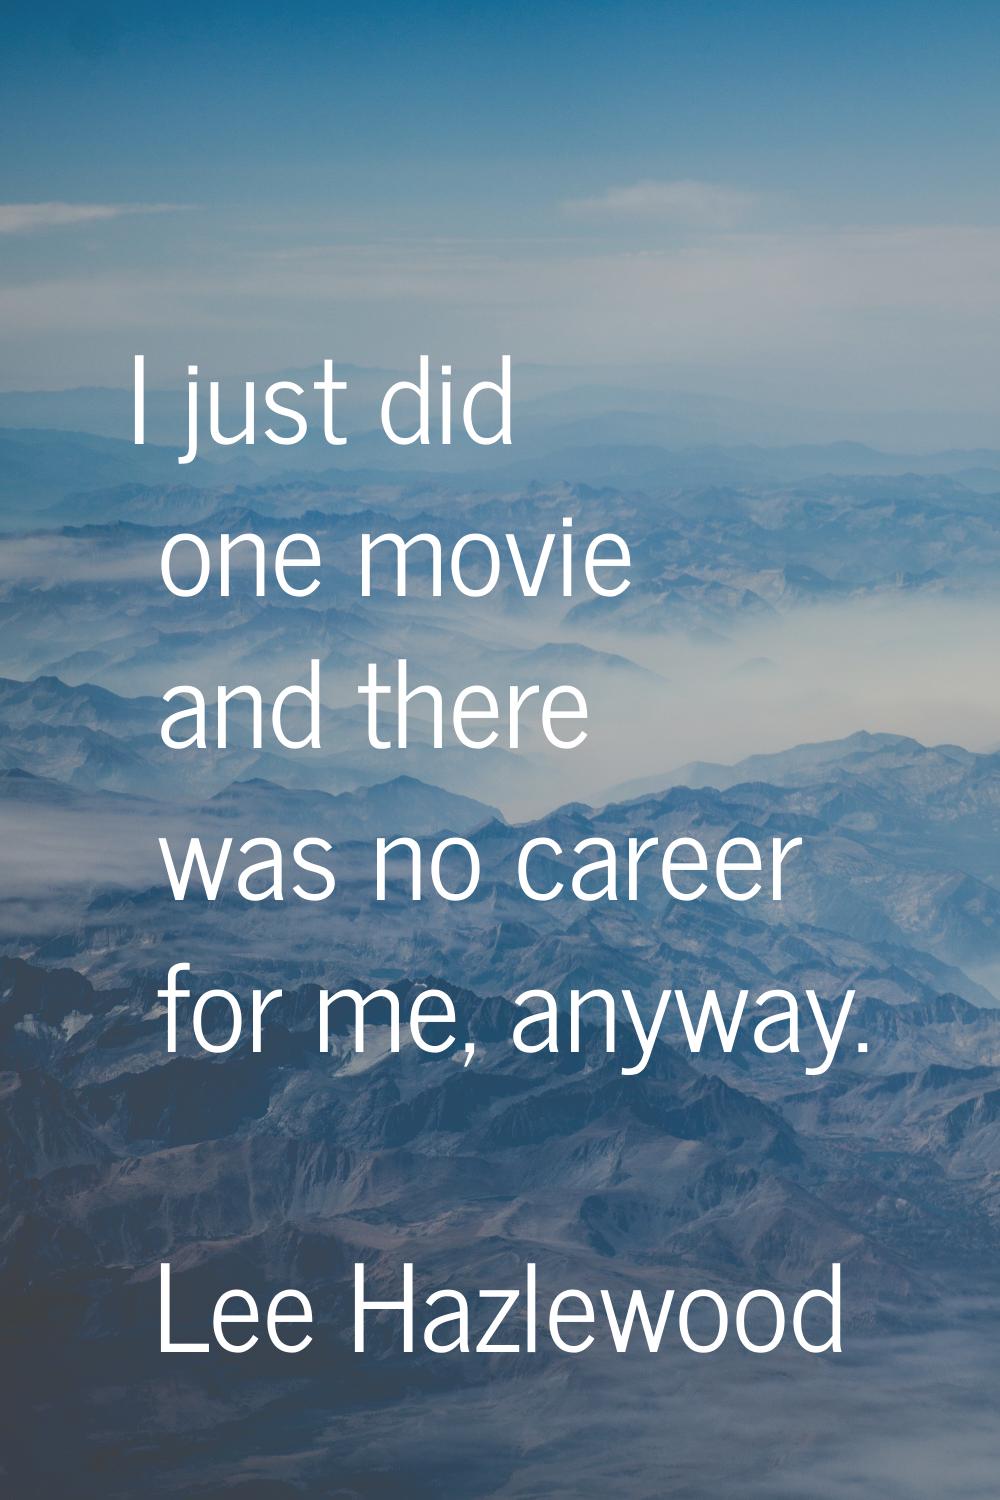 I just did one movie and there was no career for me, anyway.